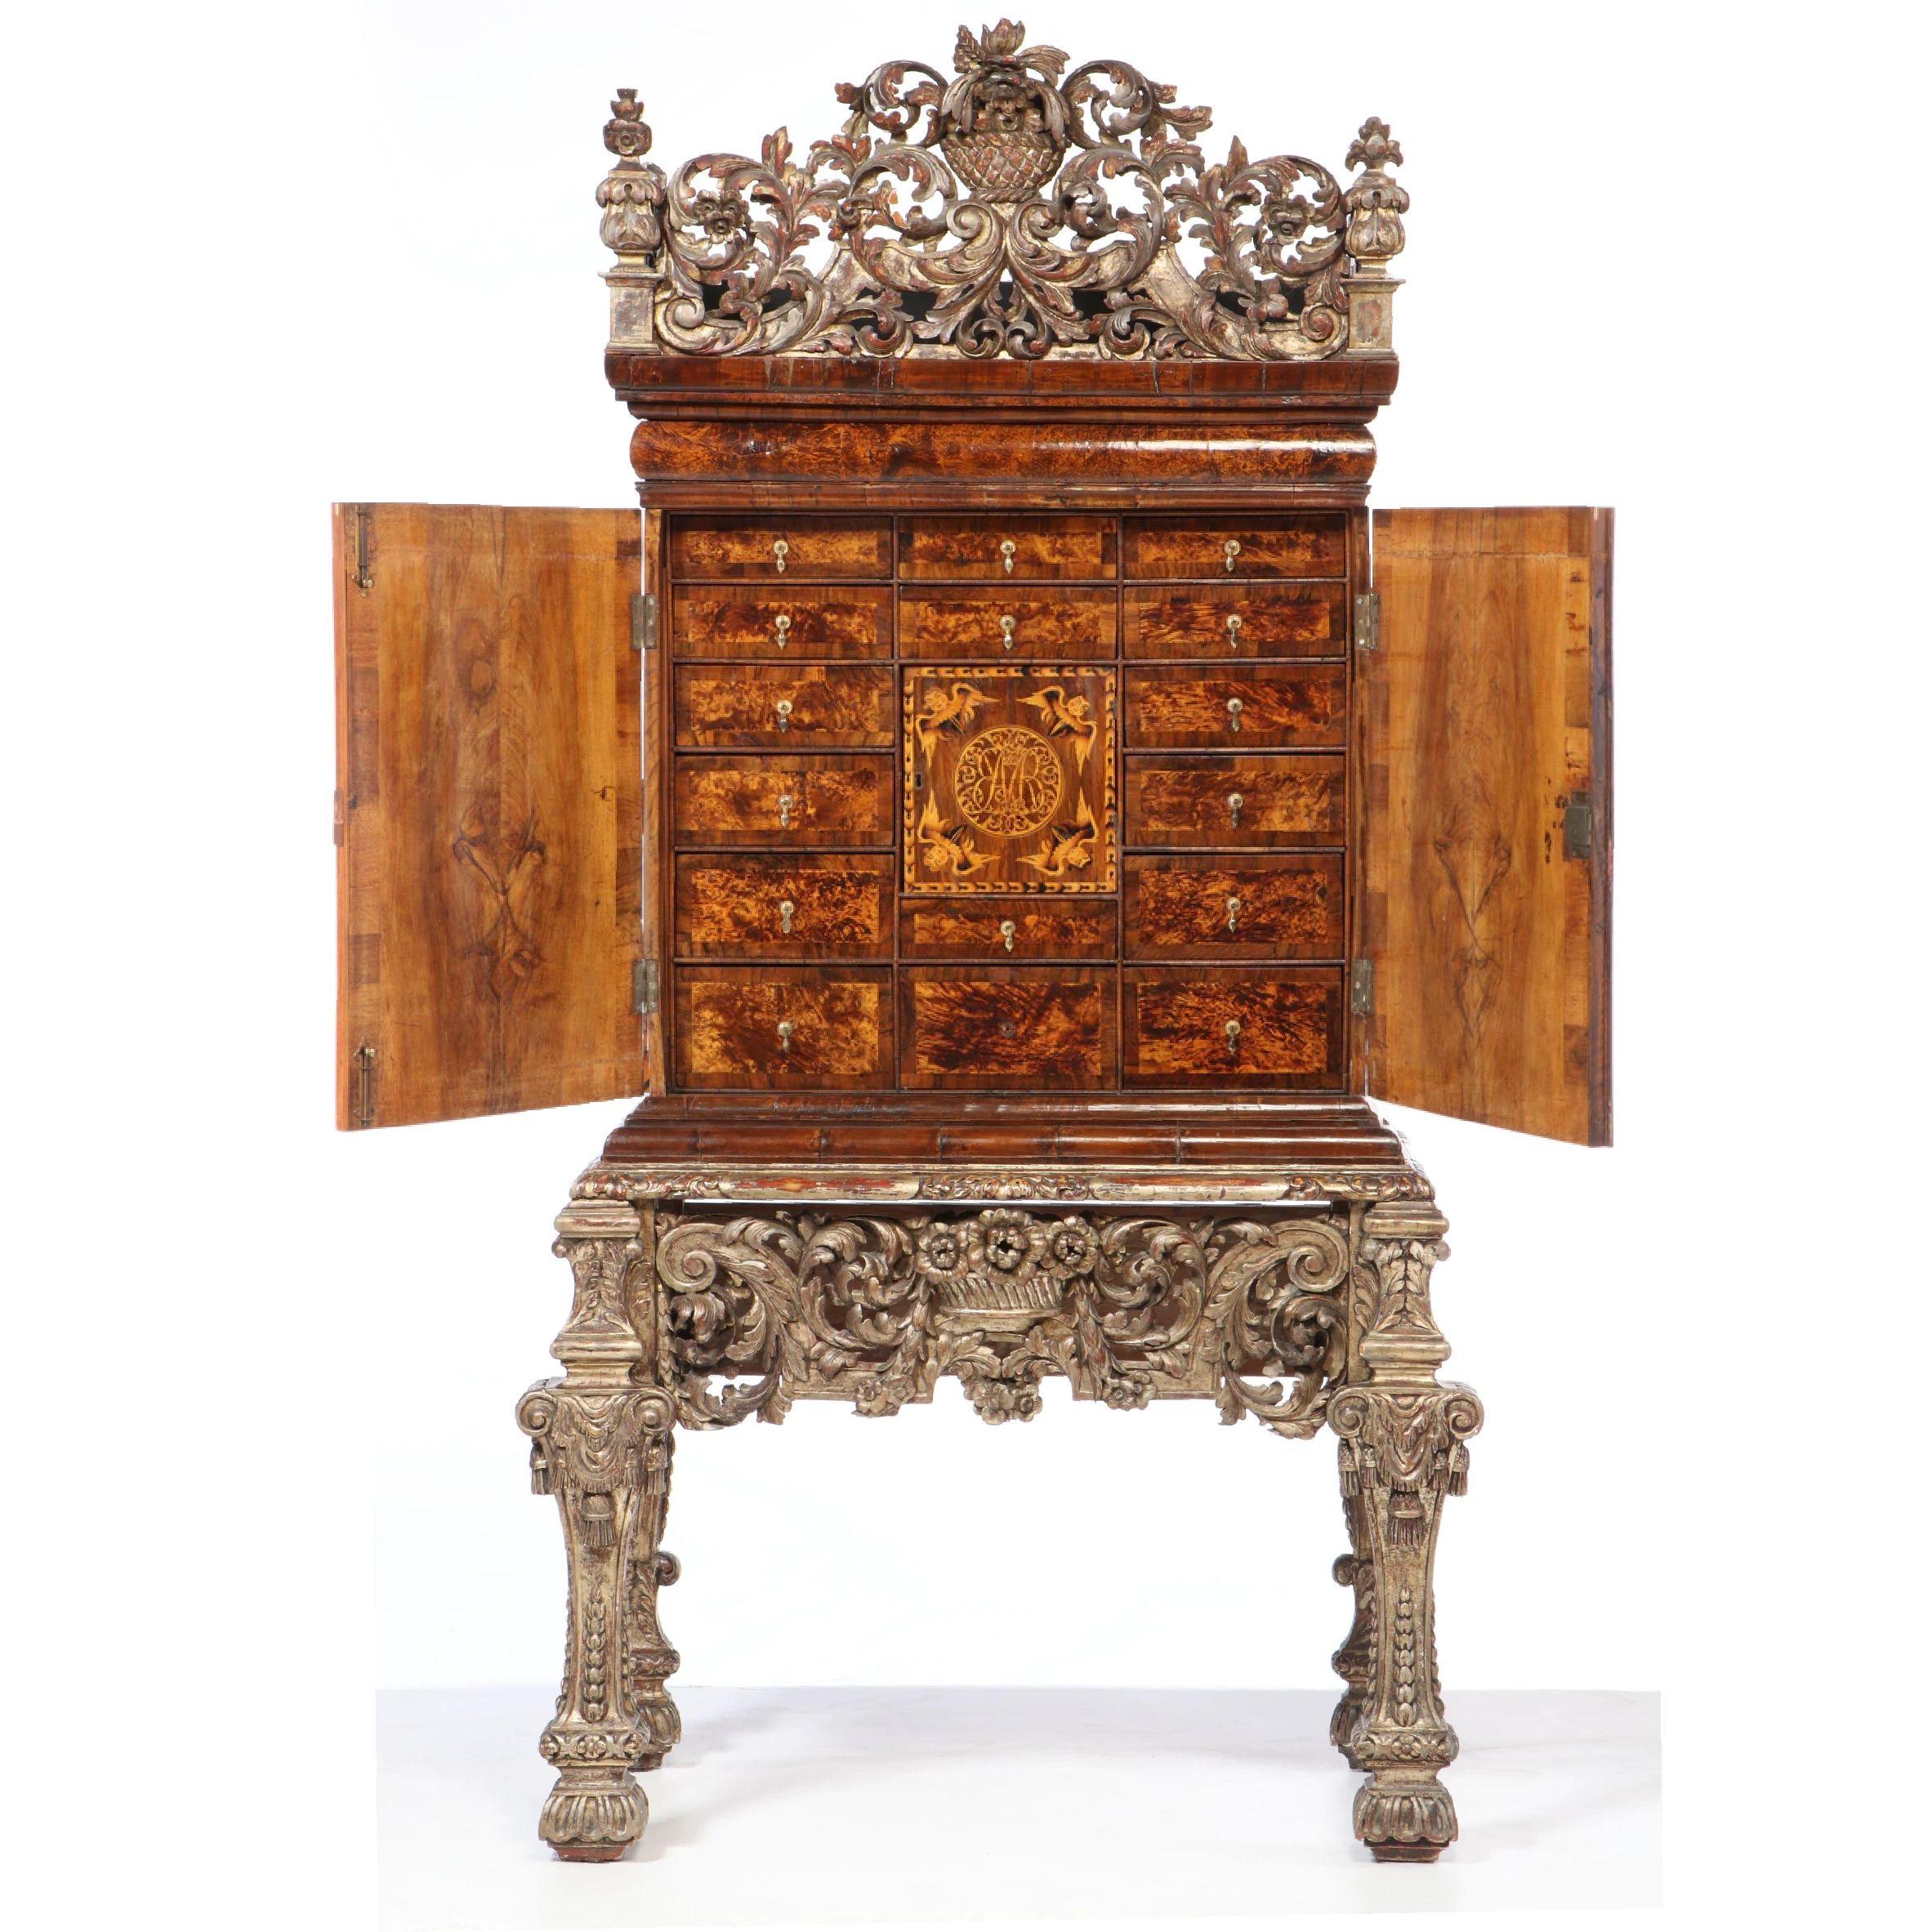 Charles II walnut and mulberry marquetry cabinet on giltwood stand, c. 1650-1670. Giltwood cresting and stand appear to be from a few decades later. 
 The form of furniture now described as a cabinet developed across Spain and France in the 16th